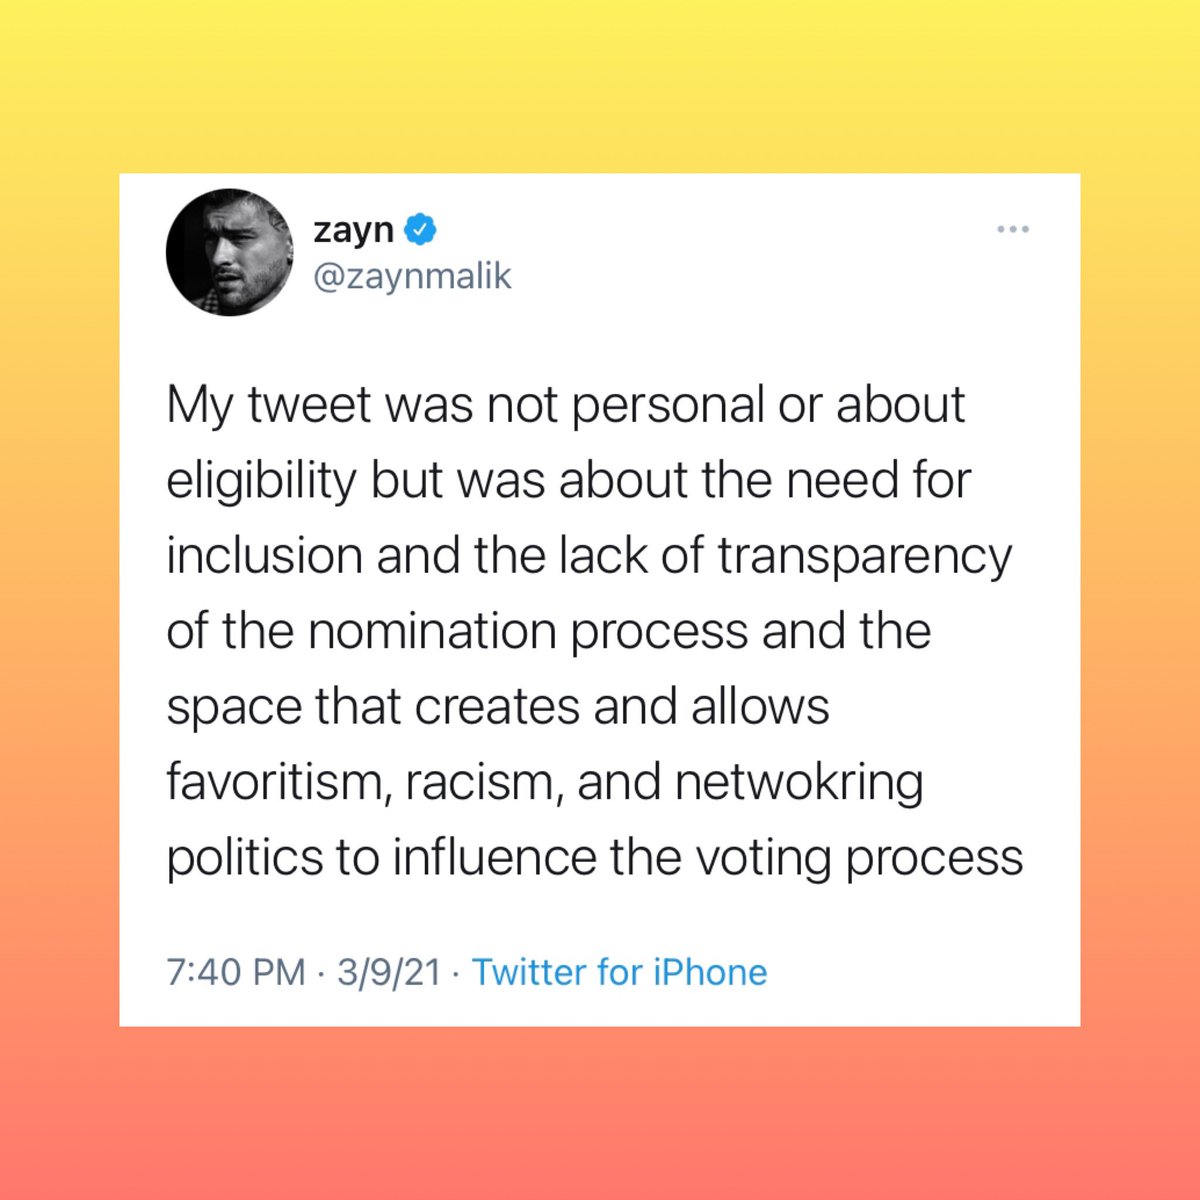 Pop Crave on Twitter: "Zayn elaborates on his #Grammys tweet: "[it] was  about the need for inclusion and the lack of transparency of the nomination  process and the space that creates and